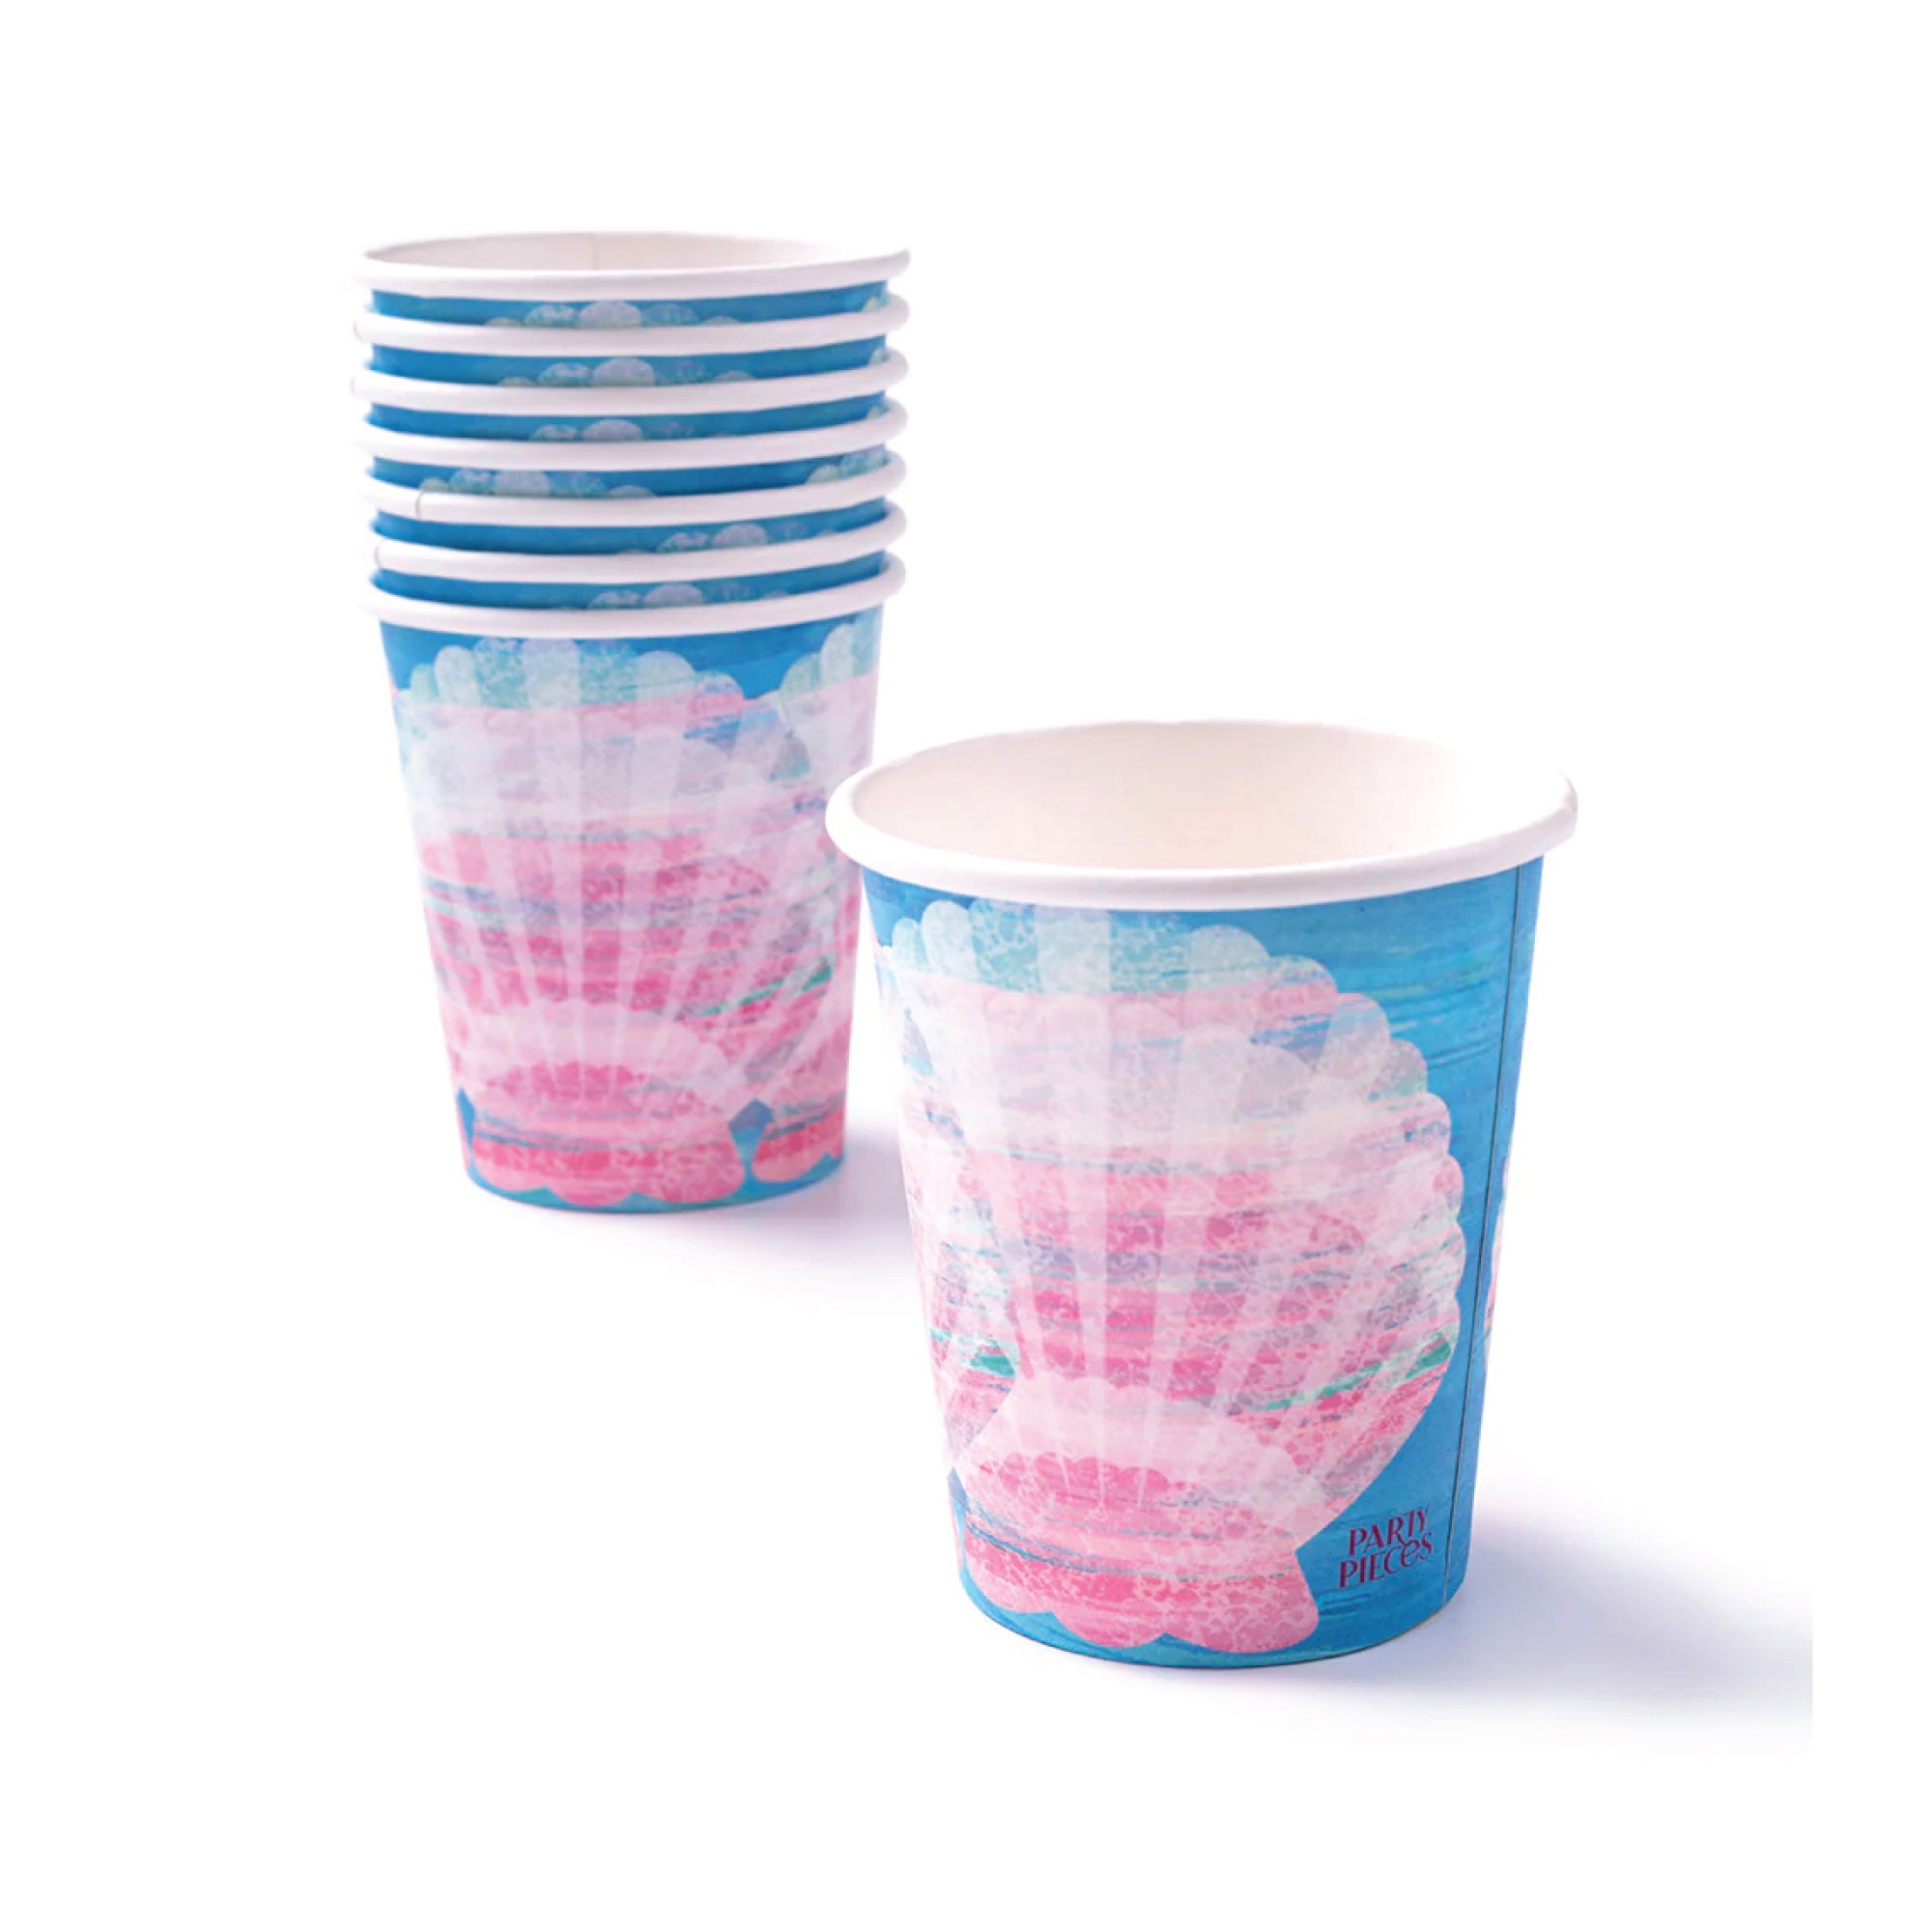 The Little Mermaid Cups, 9 oz., 8ct